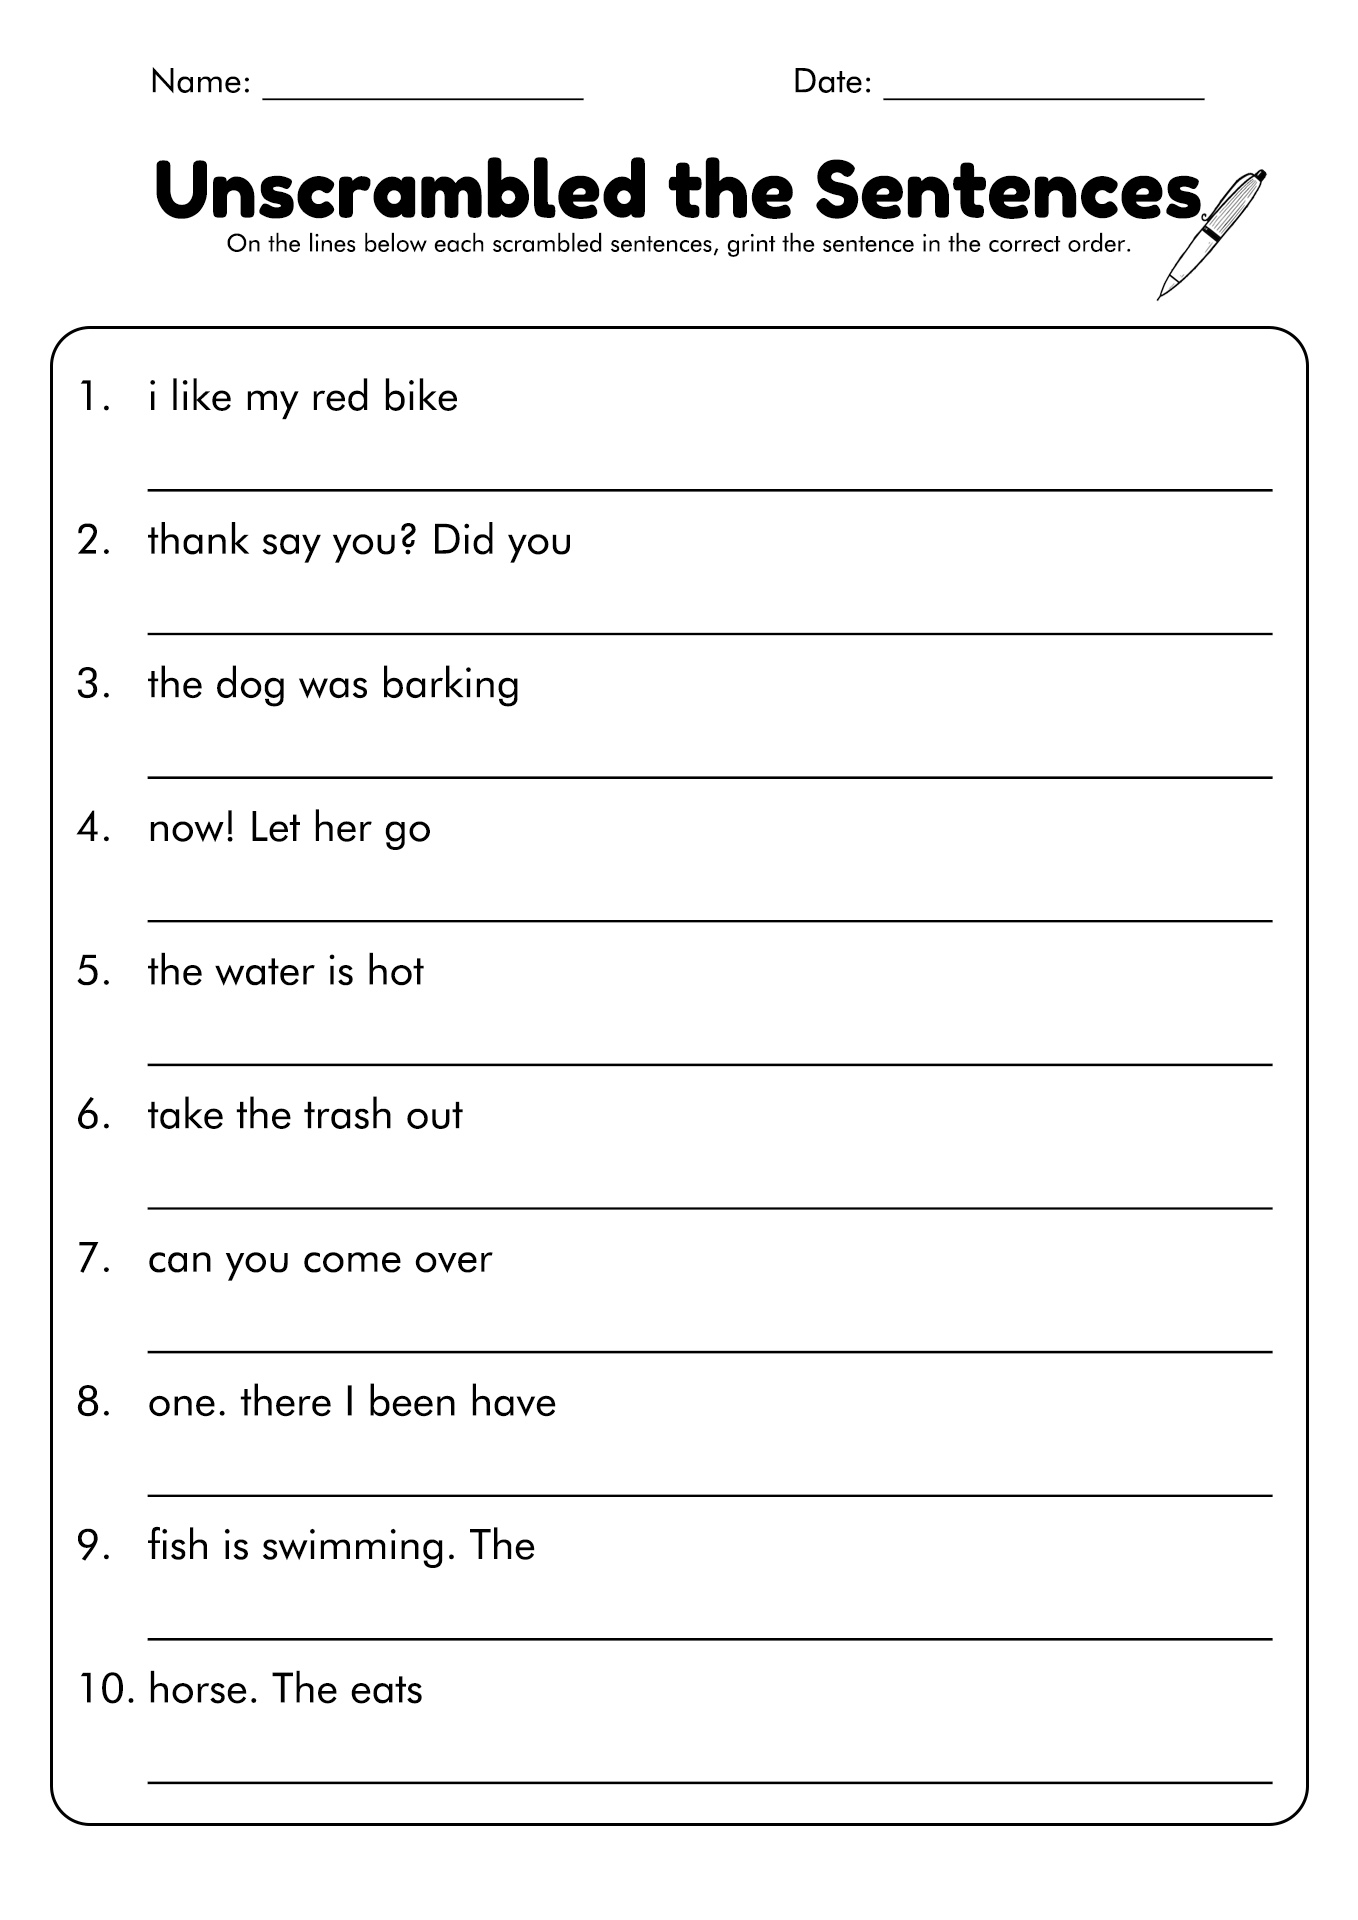 grade-3-grammar-topic-36-sentence-structure-worksheets-lets-share-knowledge-sentence